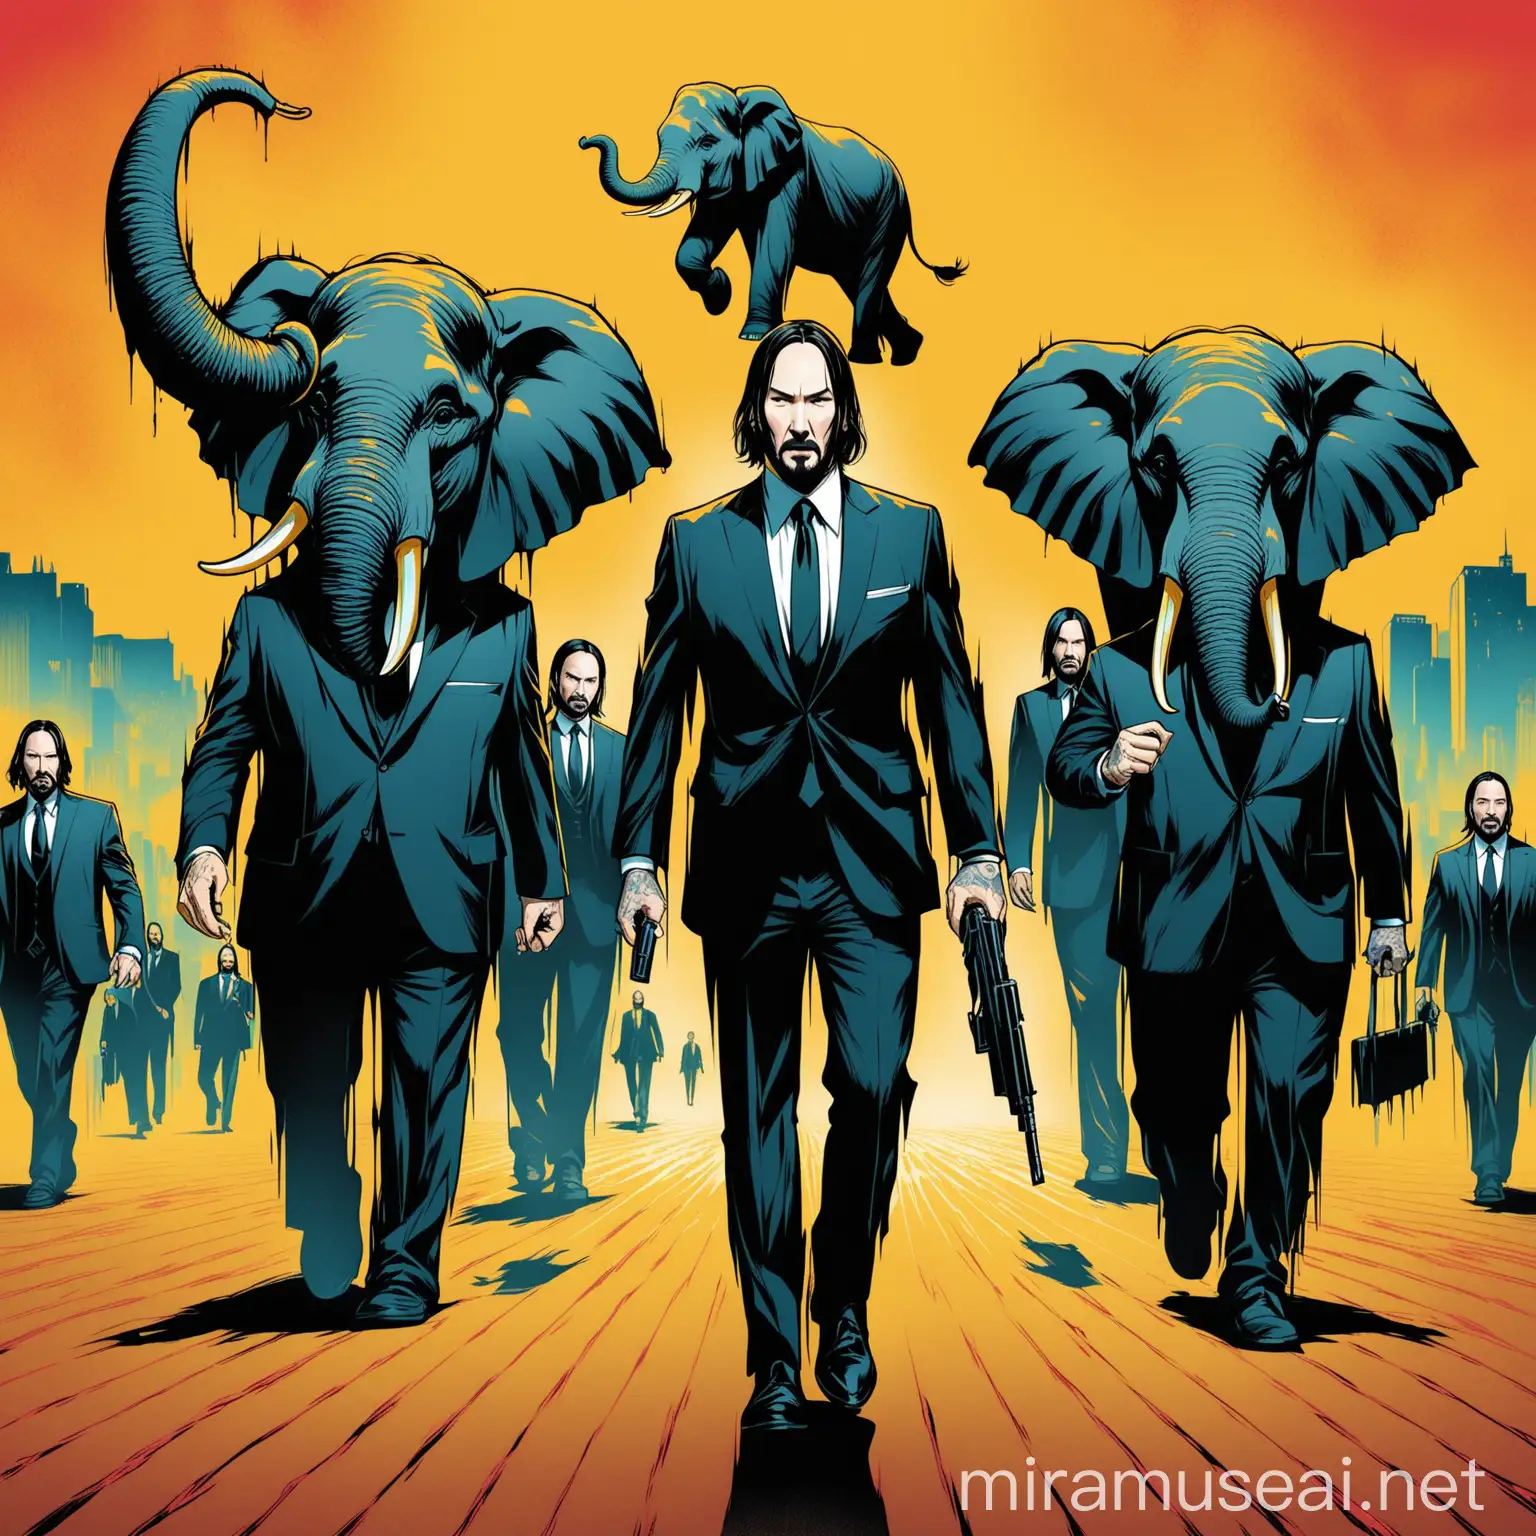 Elephant Characters in DaliInspired Poster for John Wick